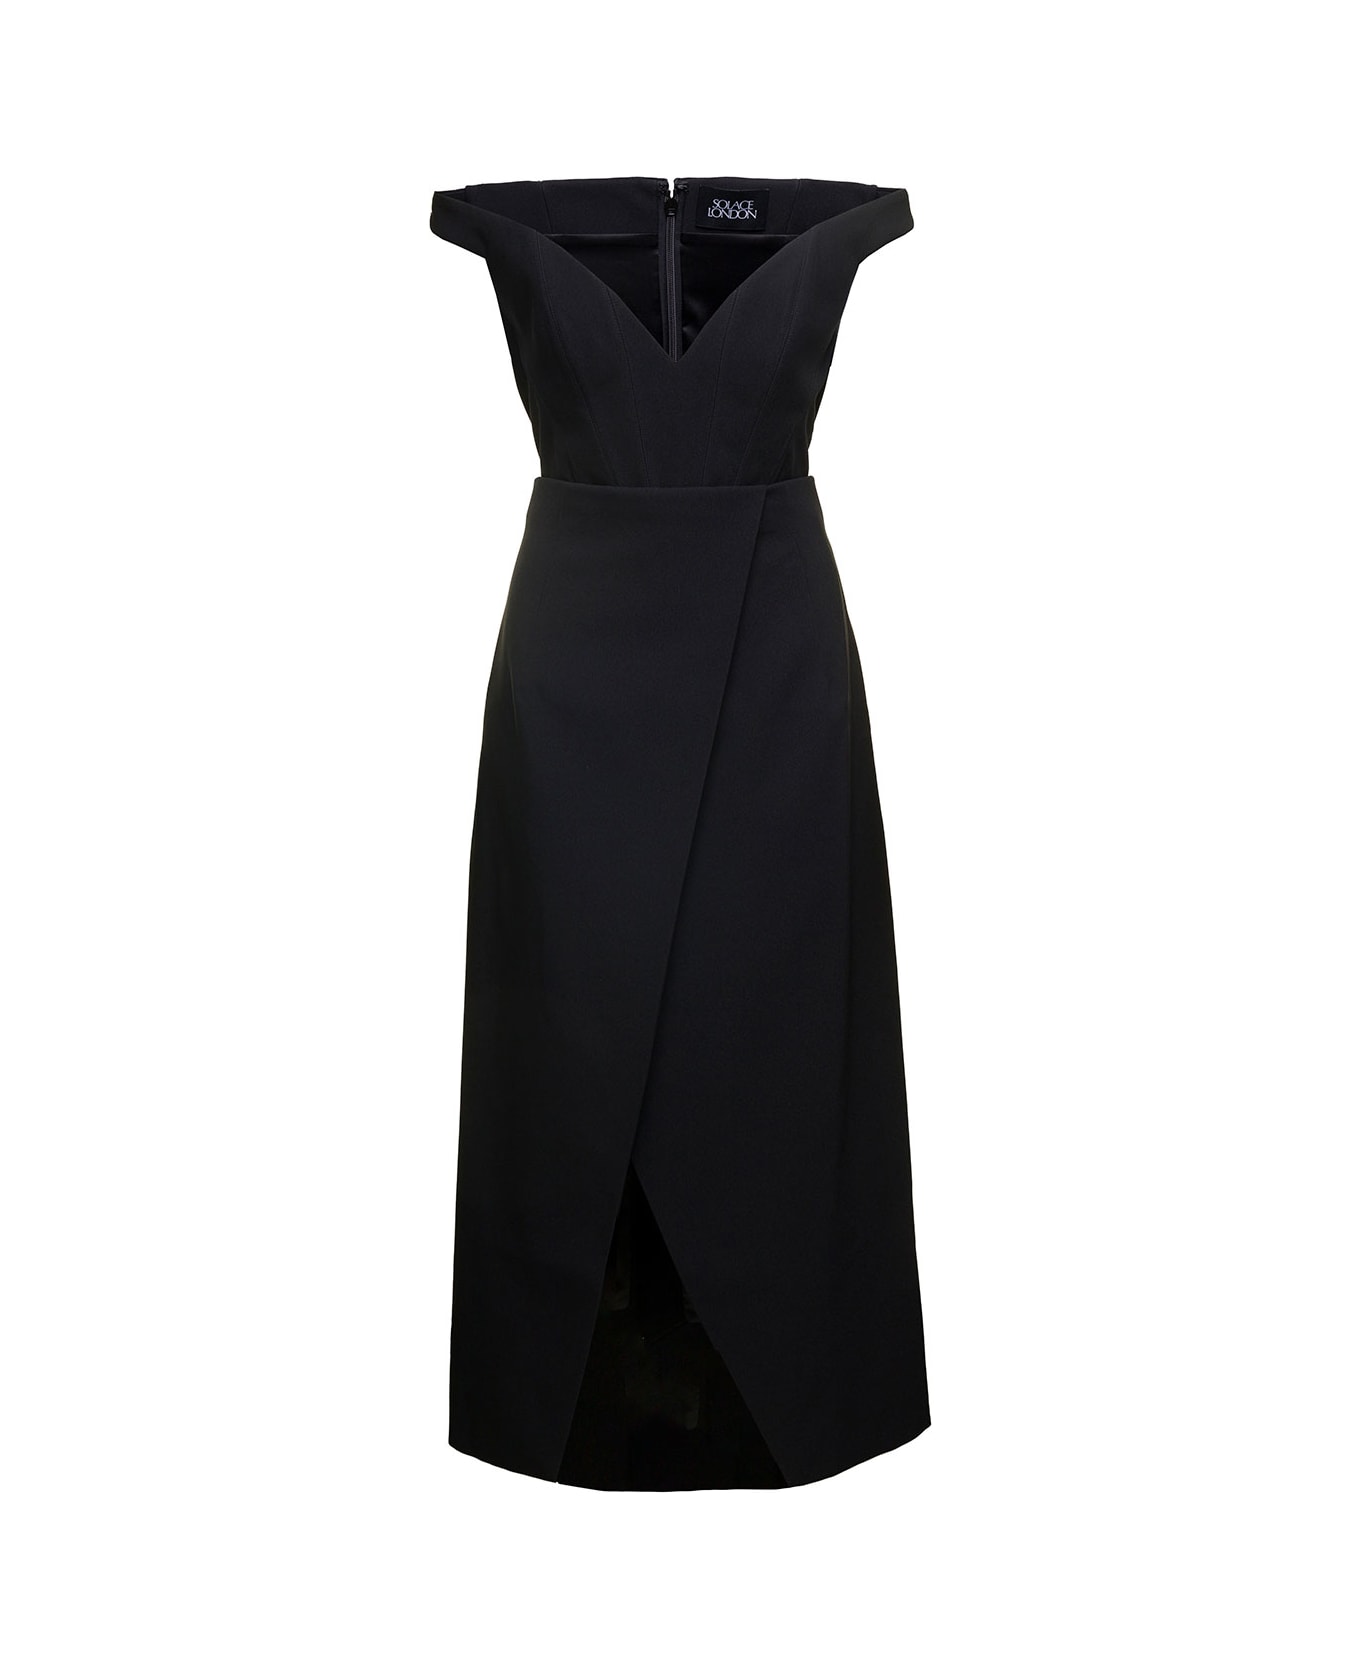 Solace London Black Midi Dress With Flared Skirt And Asymmetric Vent In Polyester Woman - Black ワンピース＆ドレス